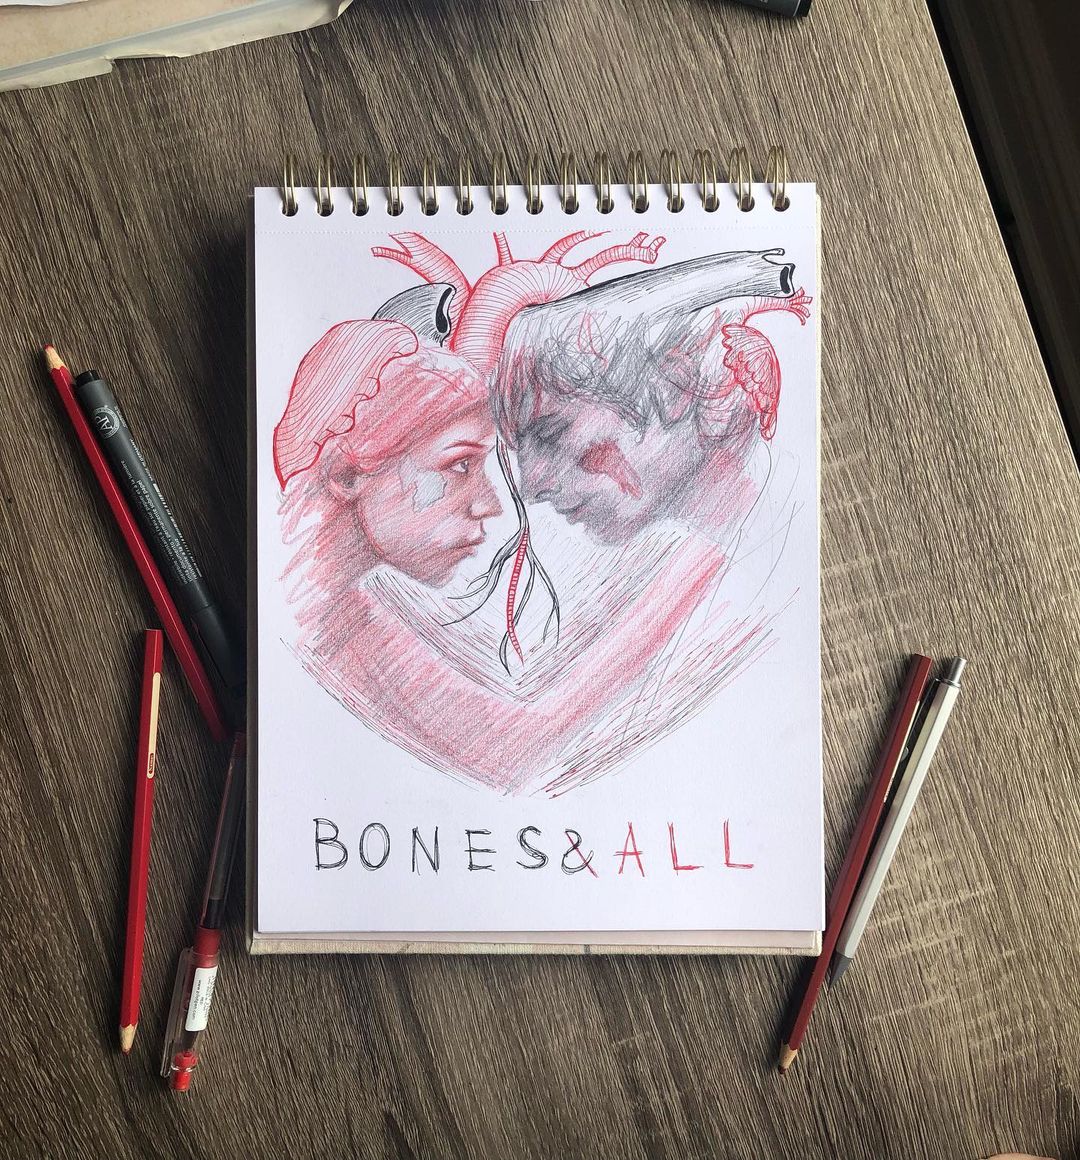 now serving - a second helping of #BonesAndAll fan art.❣️ tag us in your amazing work for a chance to be featured on #FanArtFriday 🎨 1) juliette_creative on IG 2) timoaesthetic on IG 3) @amyonfilme 4) artycasey on IG